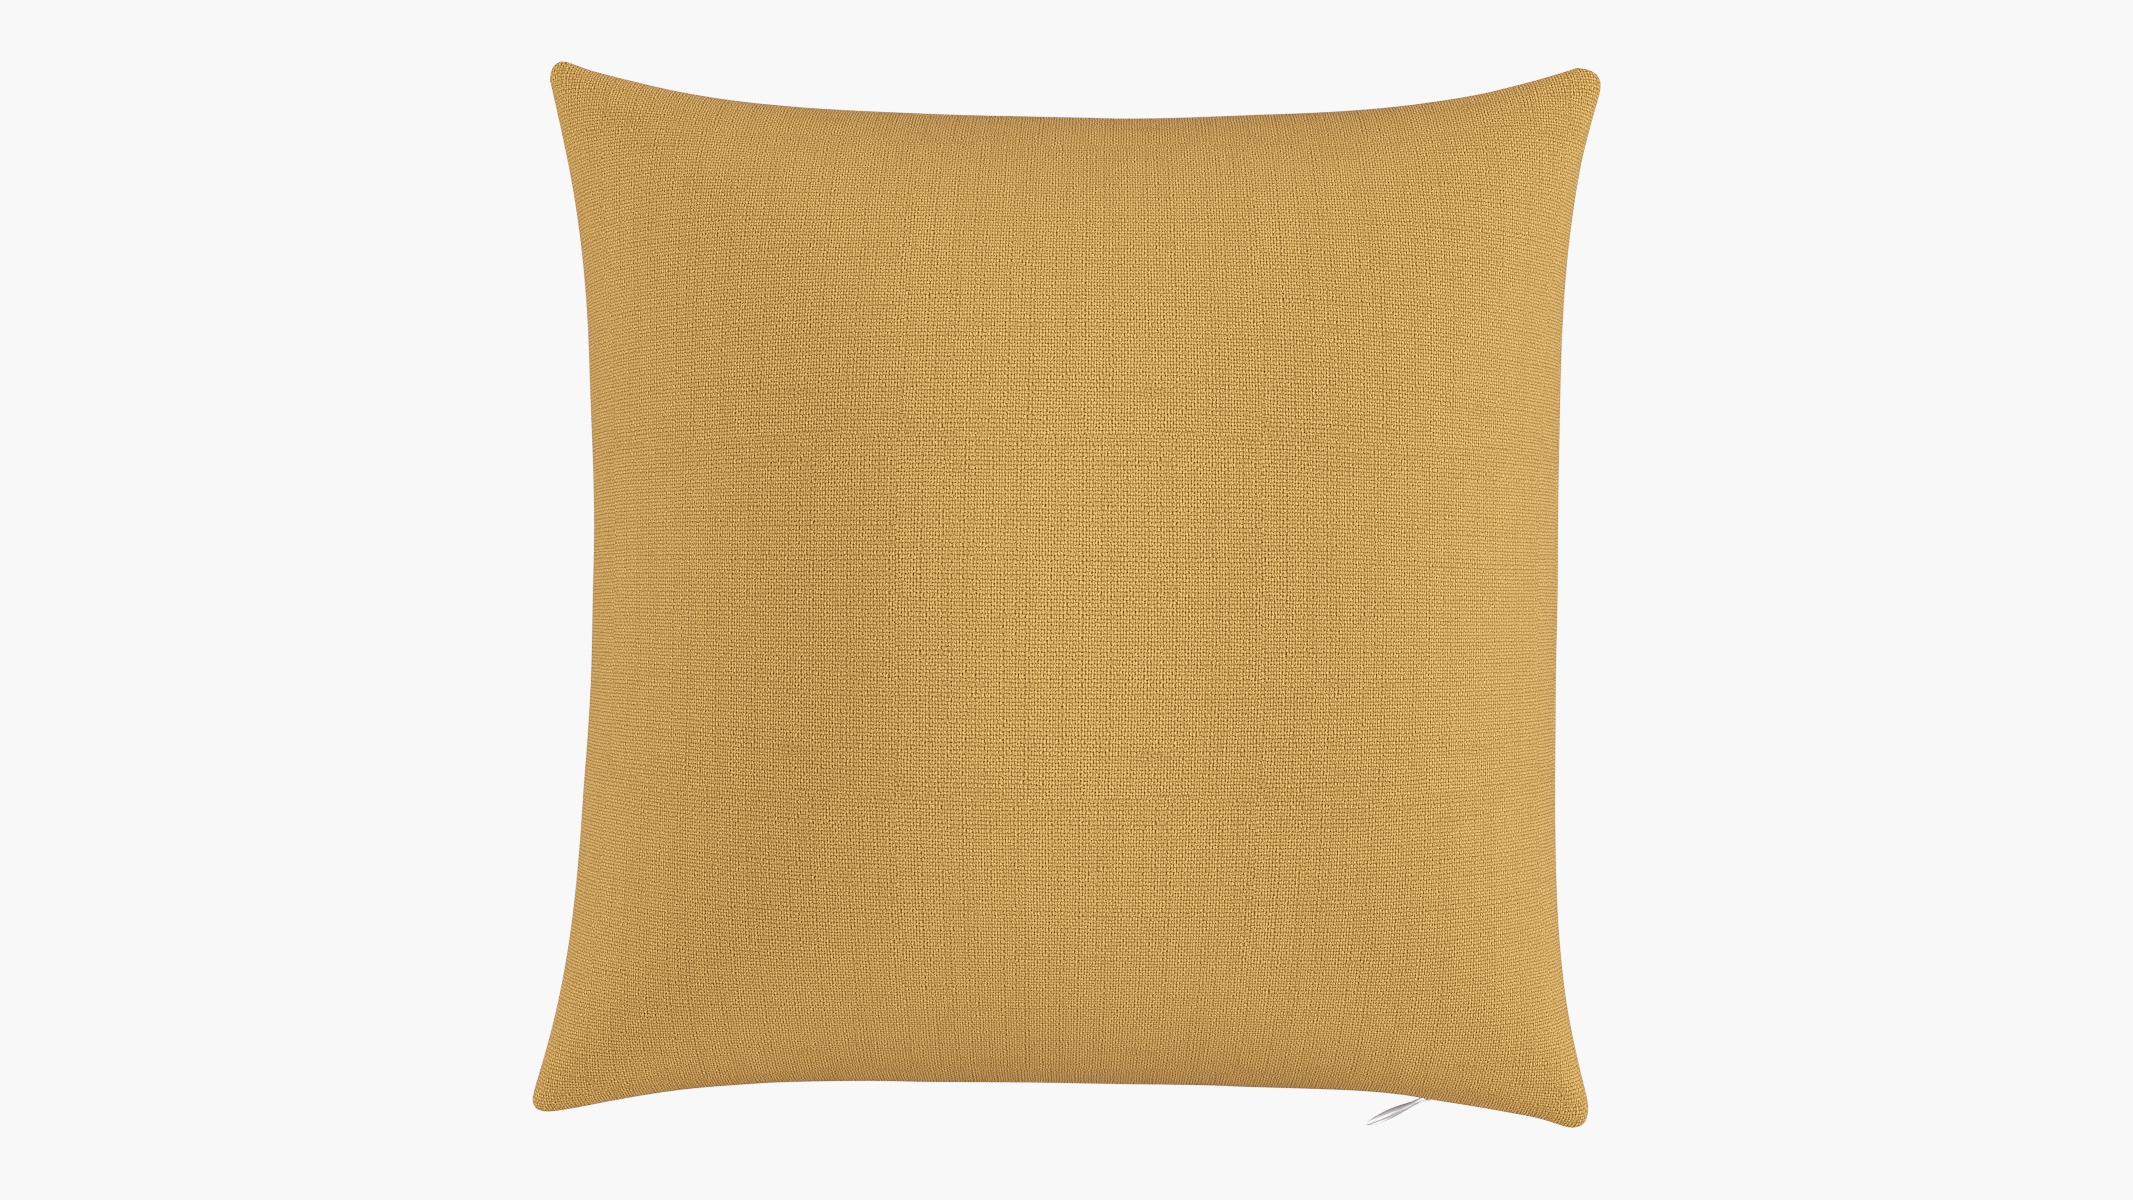 Throw Pillow 18", French Yellow Everyday Linen, 18" x 18" - Image 0